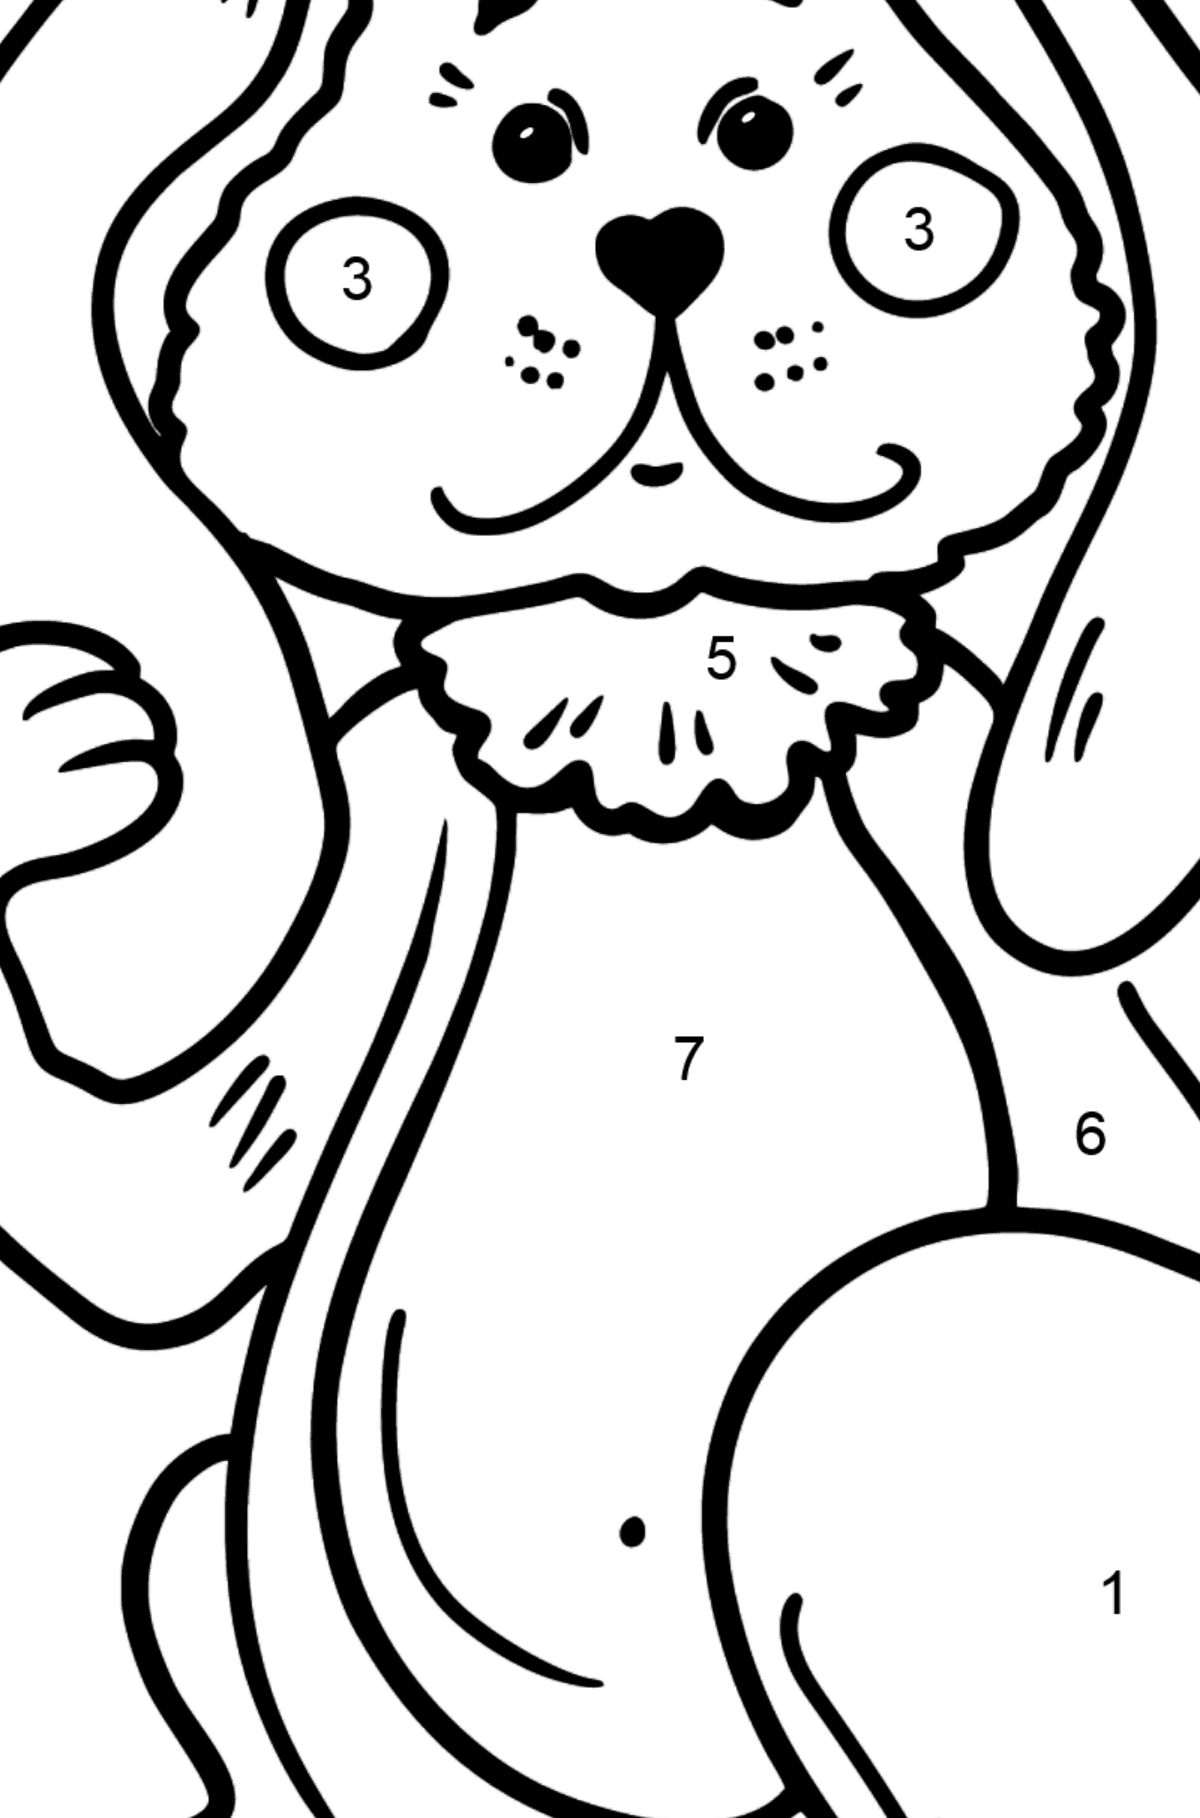 Sad Bunny coloring page - Coloring by Numbers for Kids